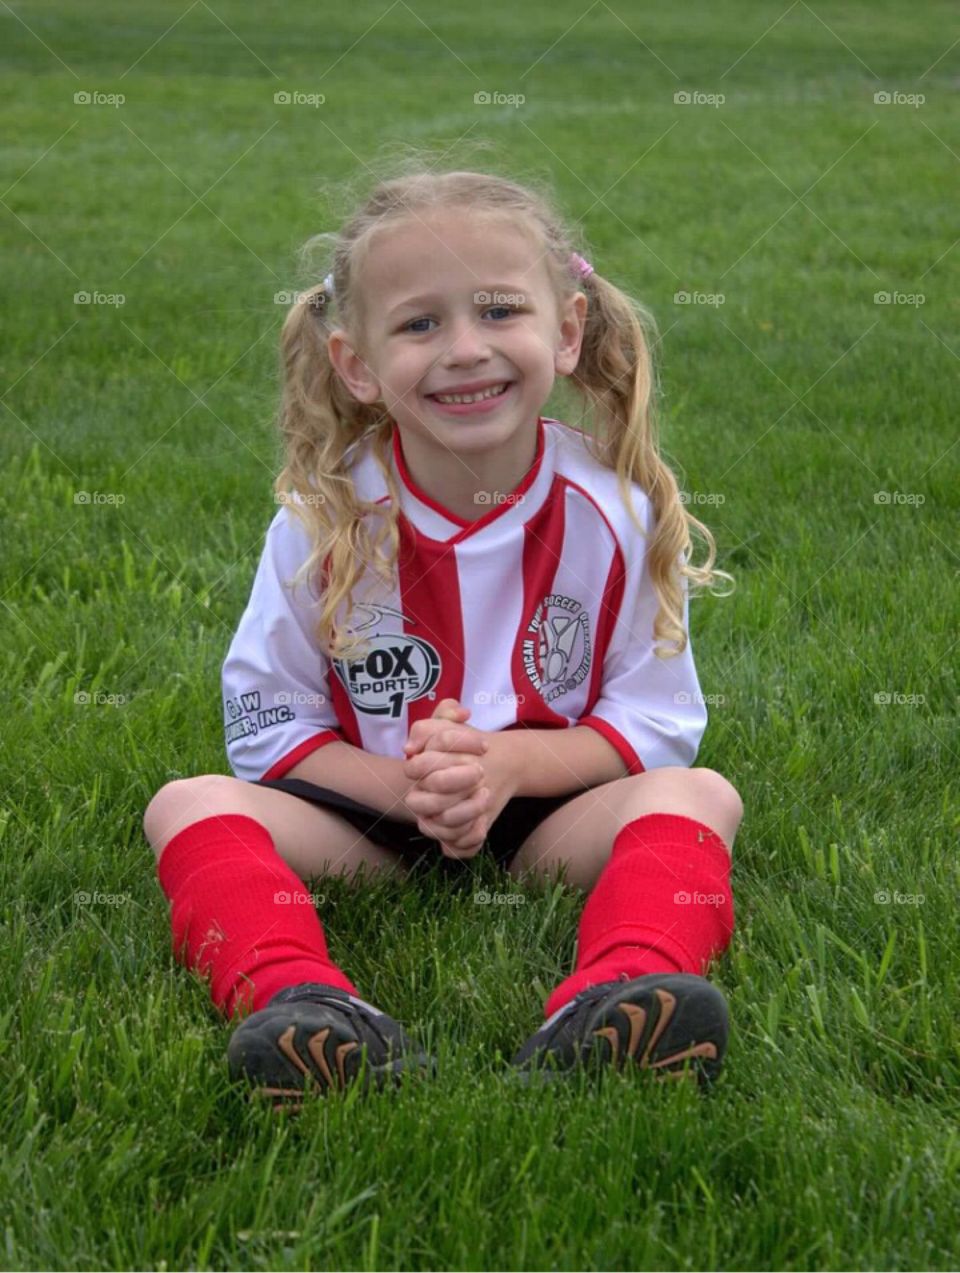 My sweet little soccer star posing for her picture. 